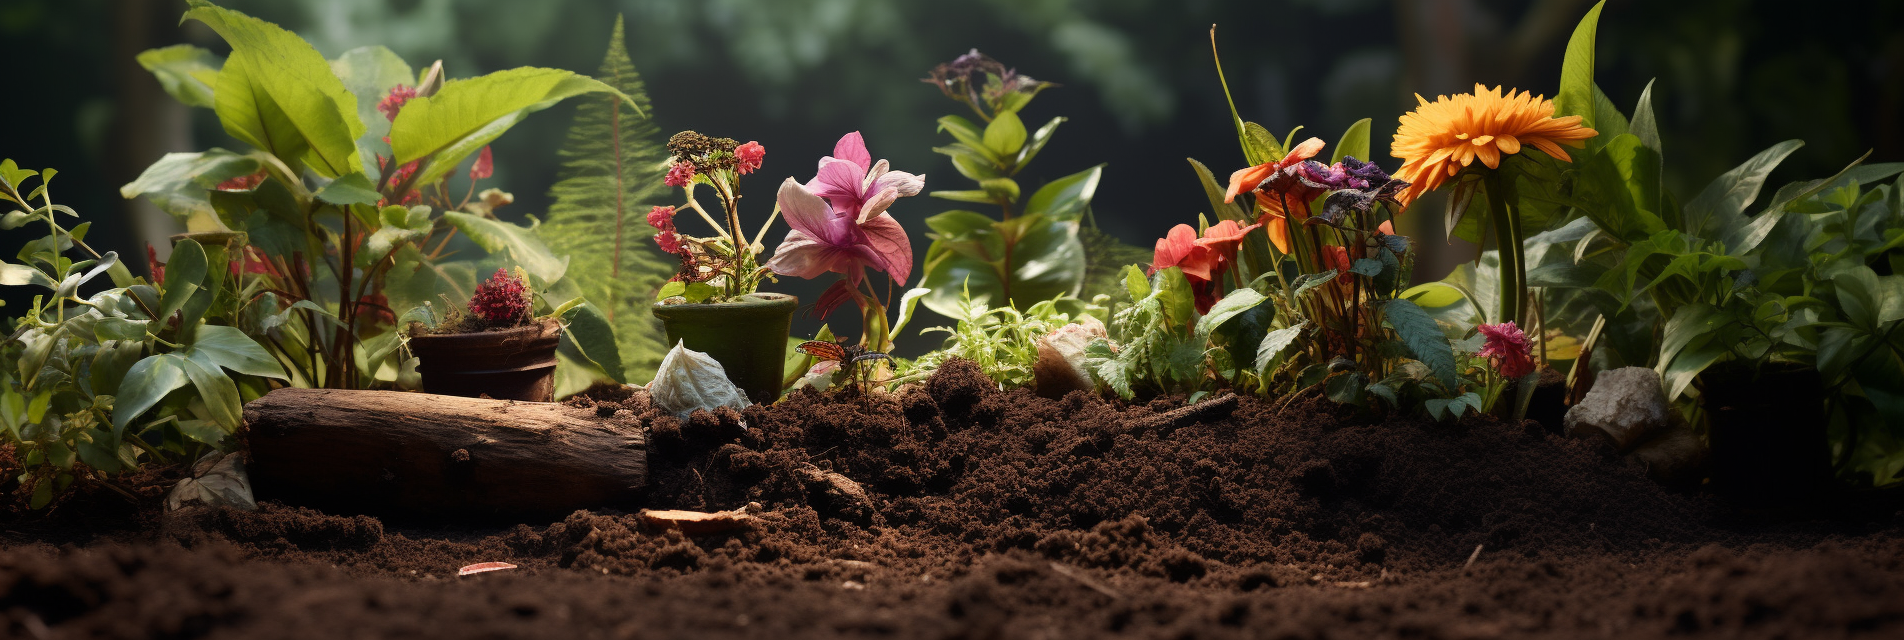 A few important tips about composting